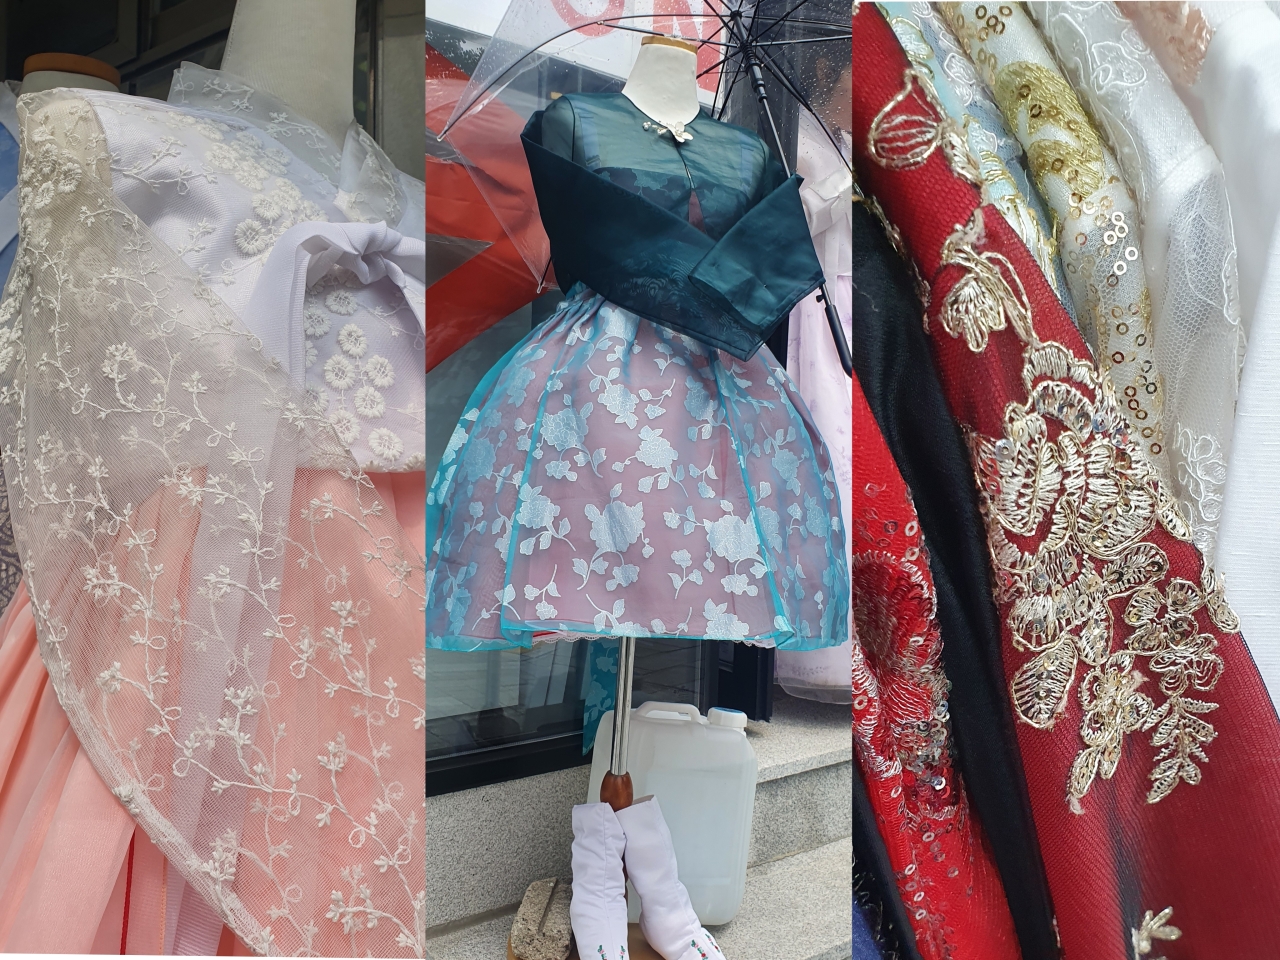 A compilation of images shows unconventional design elements shown on rental hanbok on display at shops near Gyeongbokgung, Jongno-gu, Seoul. (Lee Jung-youn/The Korea Herald)